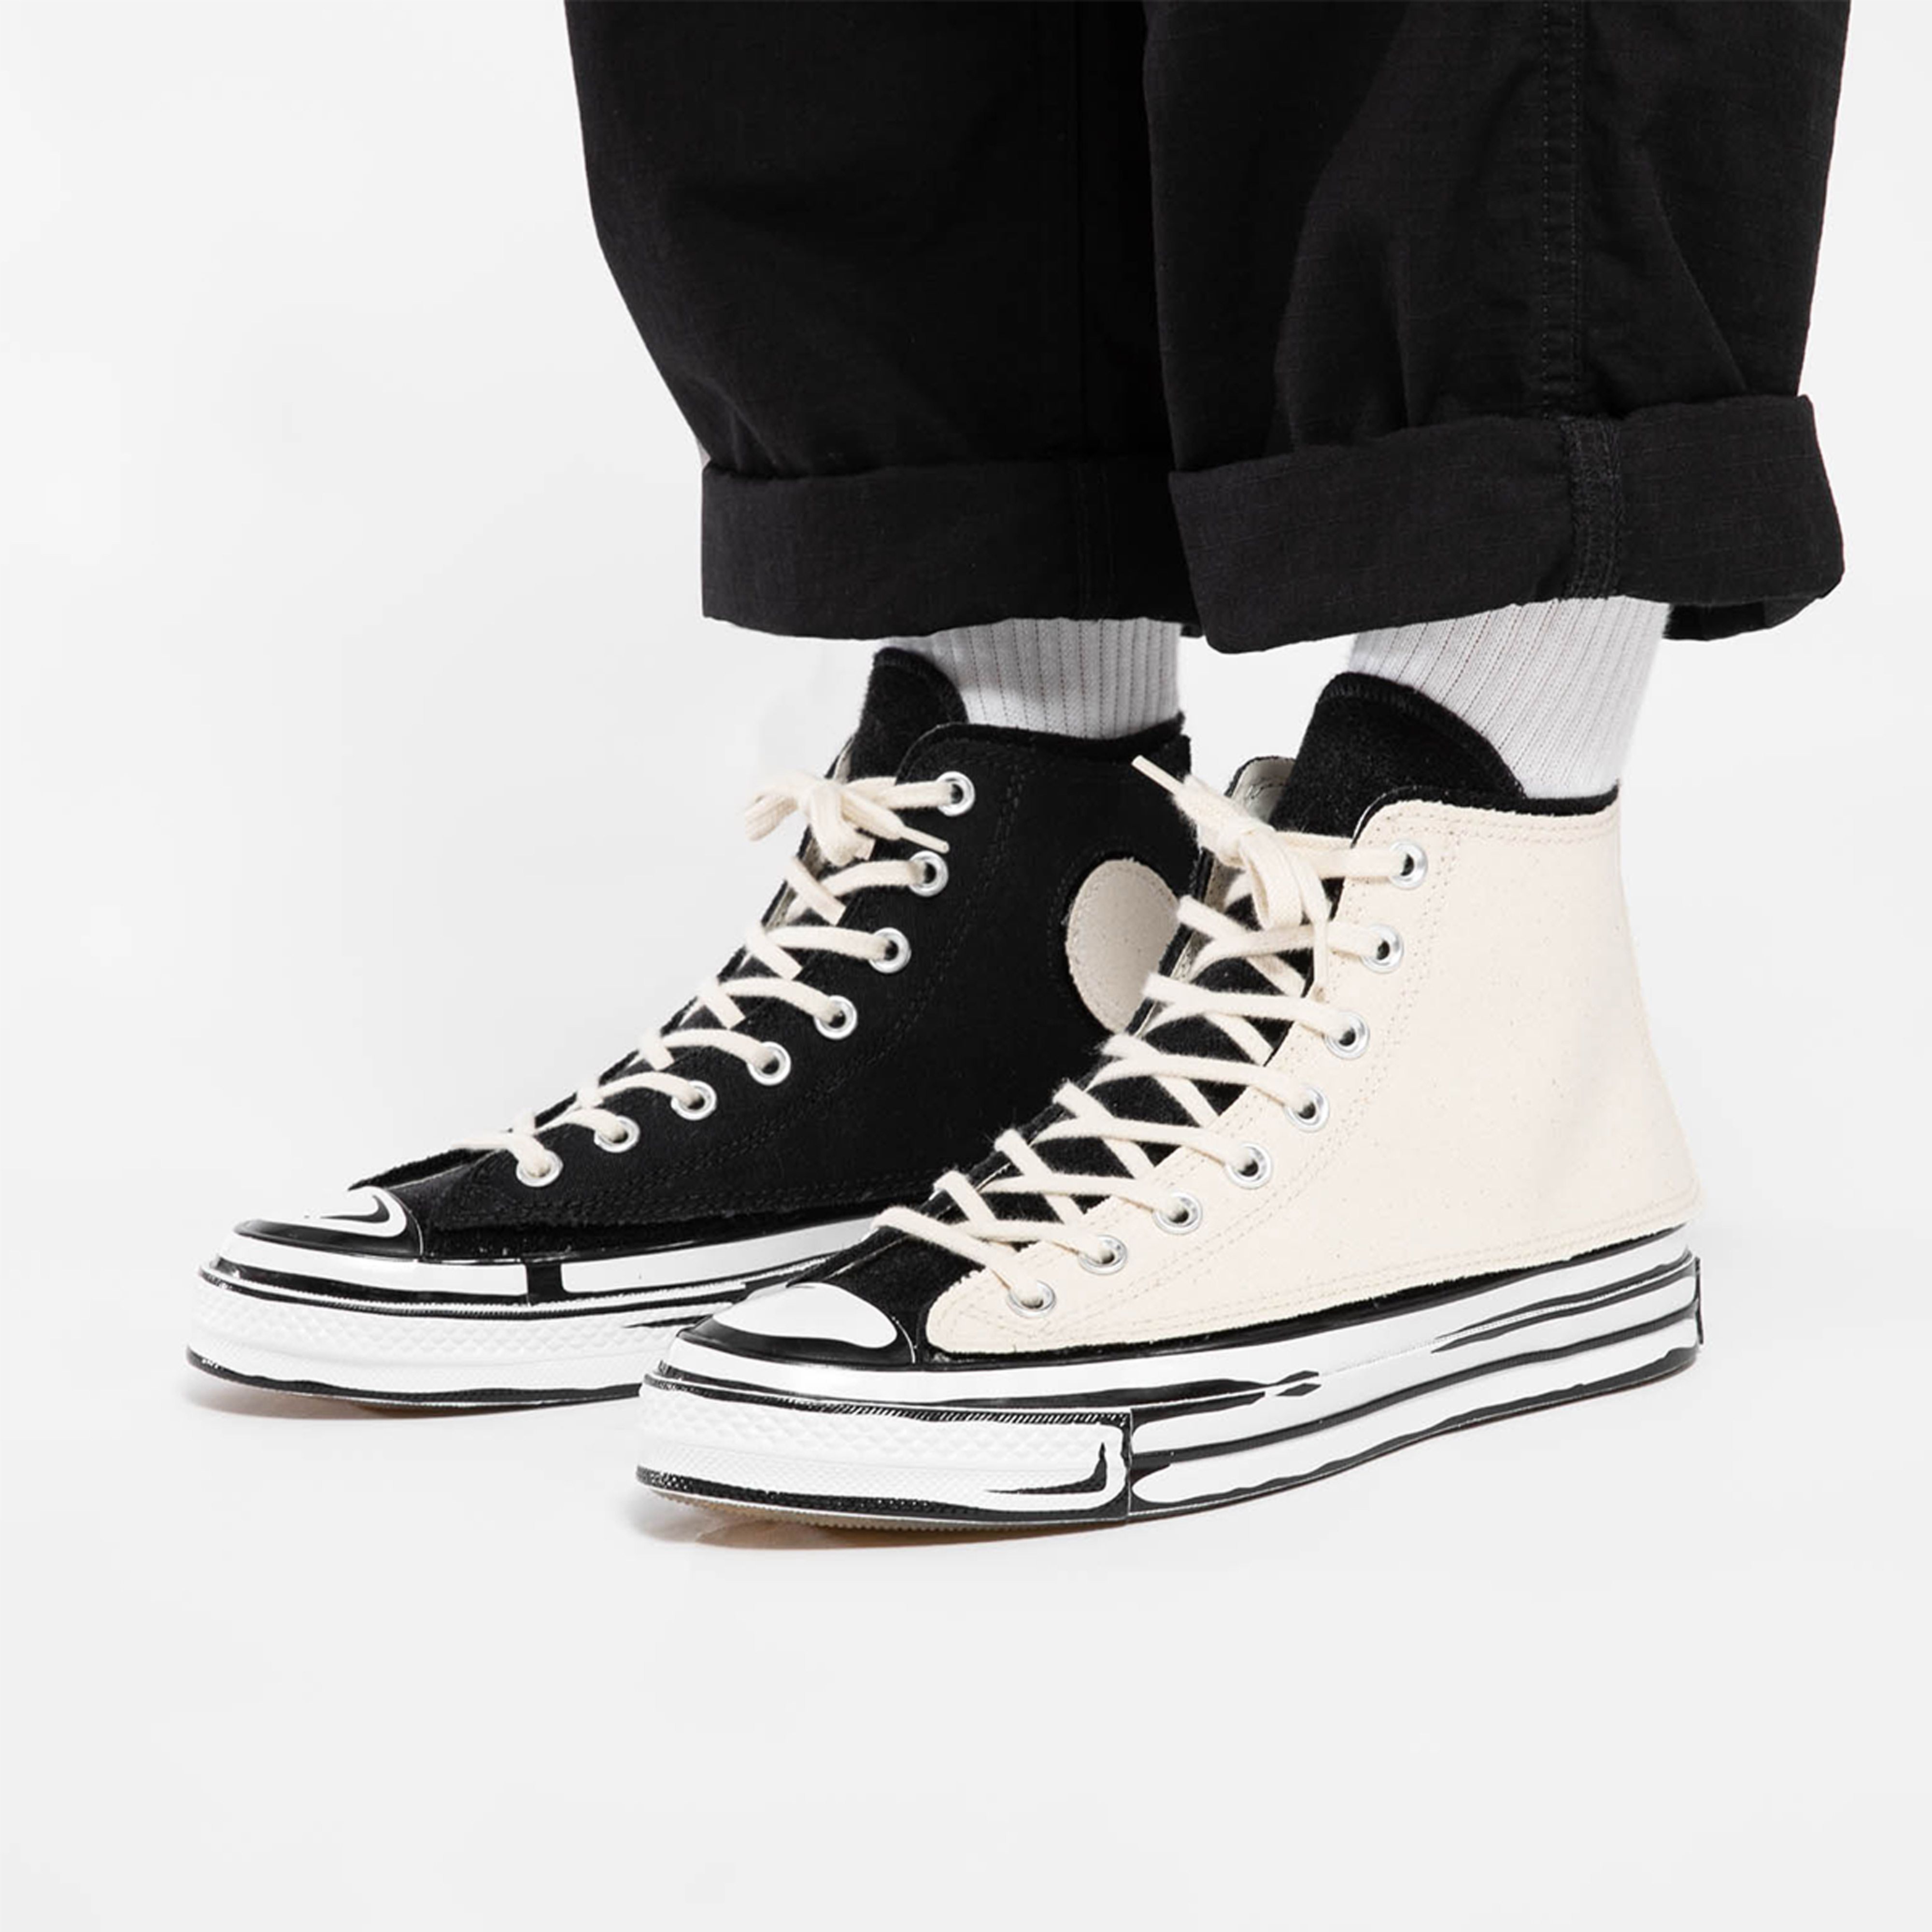 Titolo on Twitter: "ONLINE NOW 🔥 Joshua Vides x Converse Chuck 70s Get Yours Now ➡️ https://t.co/xR4Wn7i2da US (36.5) US 12 (46.5)⁠ style codes 🔎 and 166559C⁠ #converse #joshuavides #